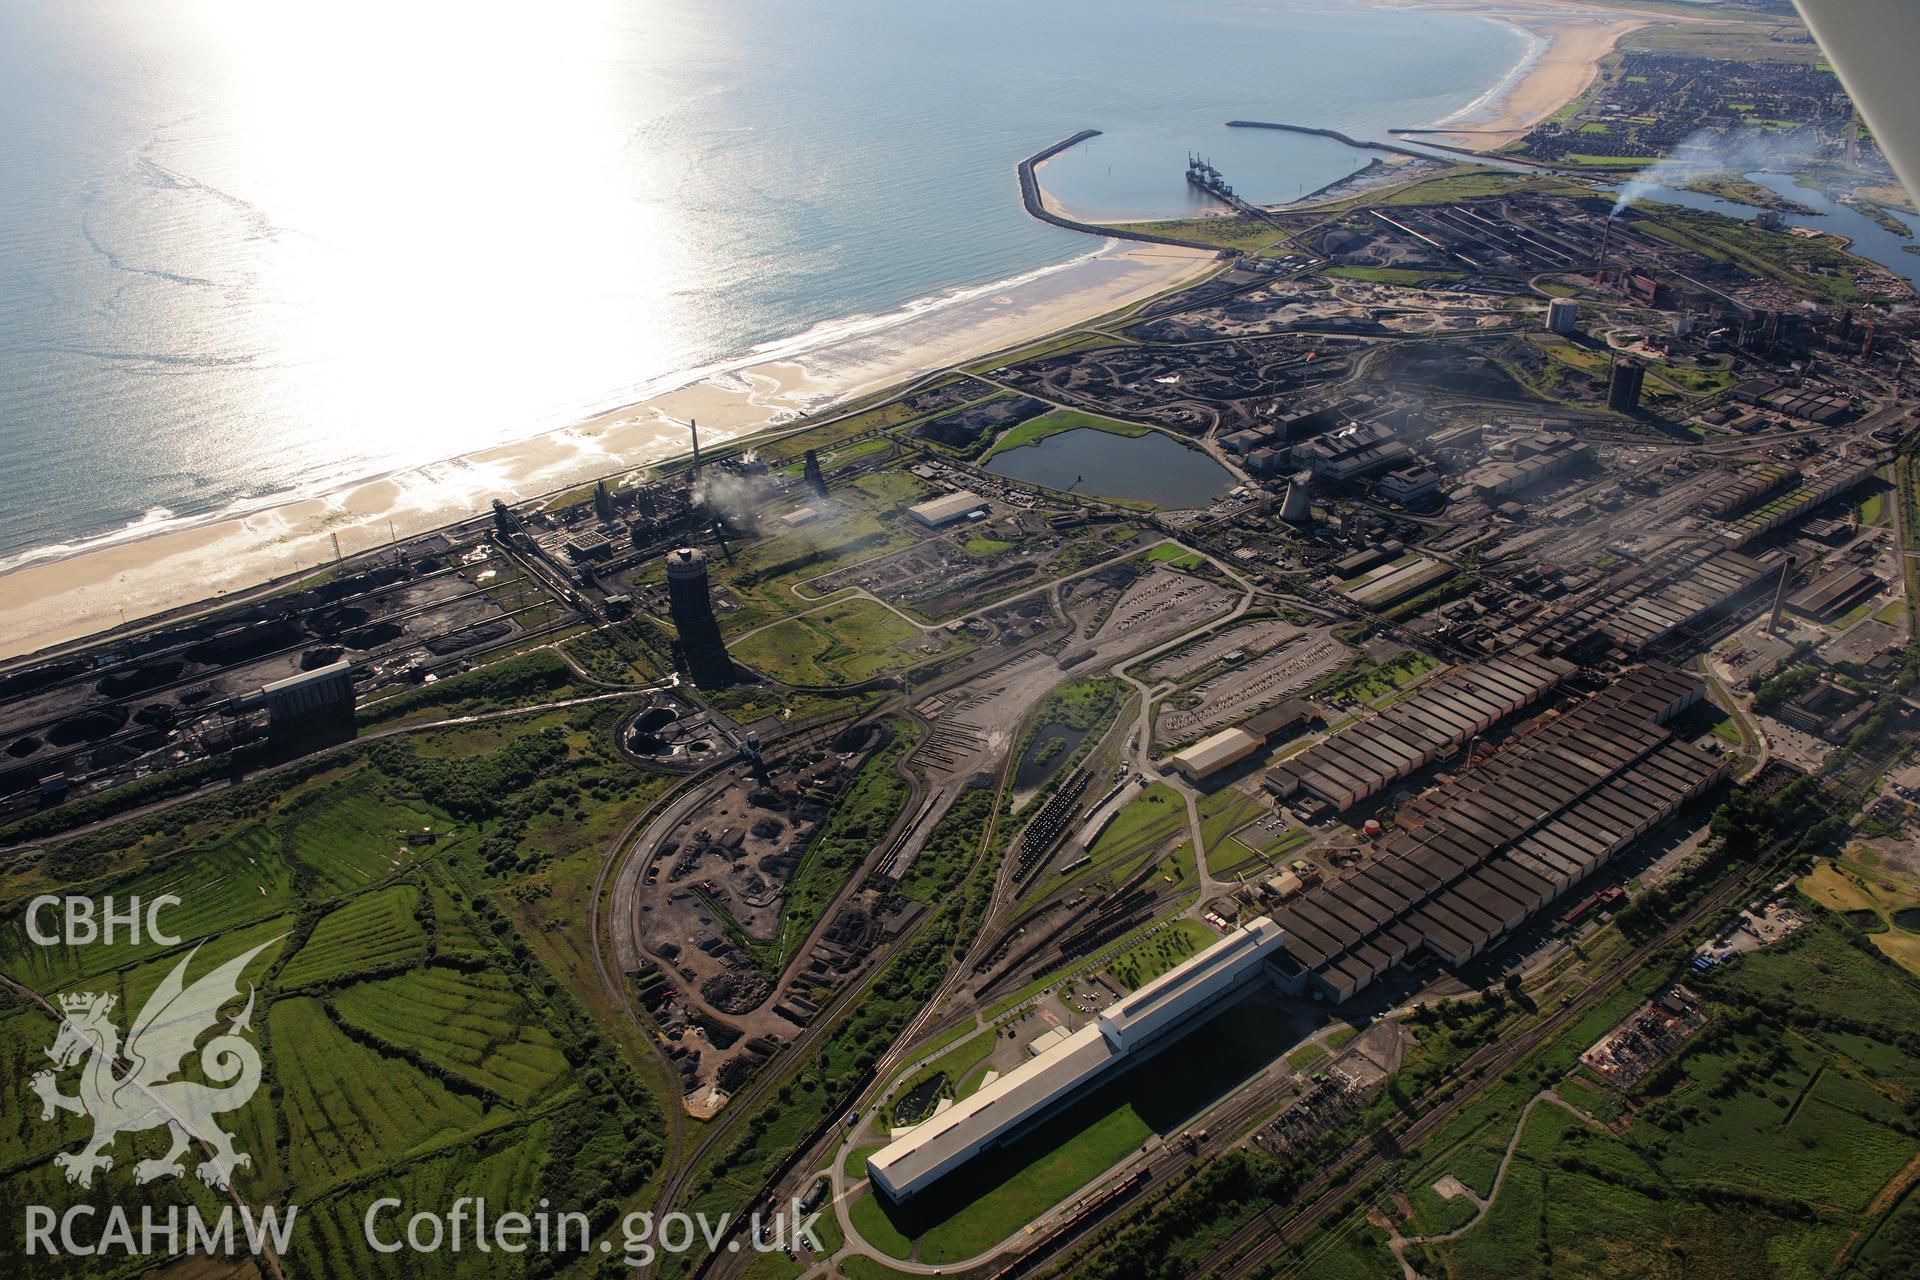 RCAHMW colour oblique photograph of Margam Steelworks. Taken by Toby Driver on 24/07/2012.